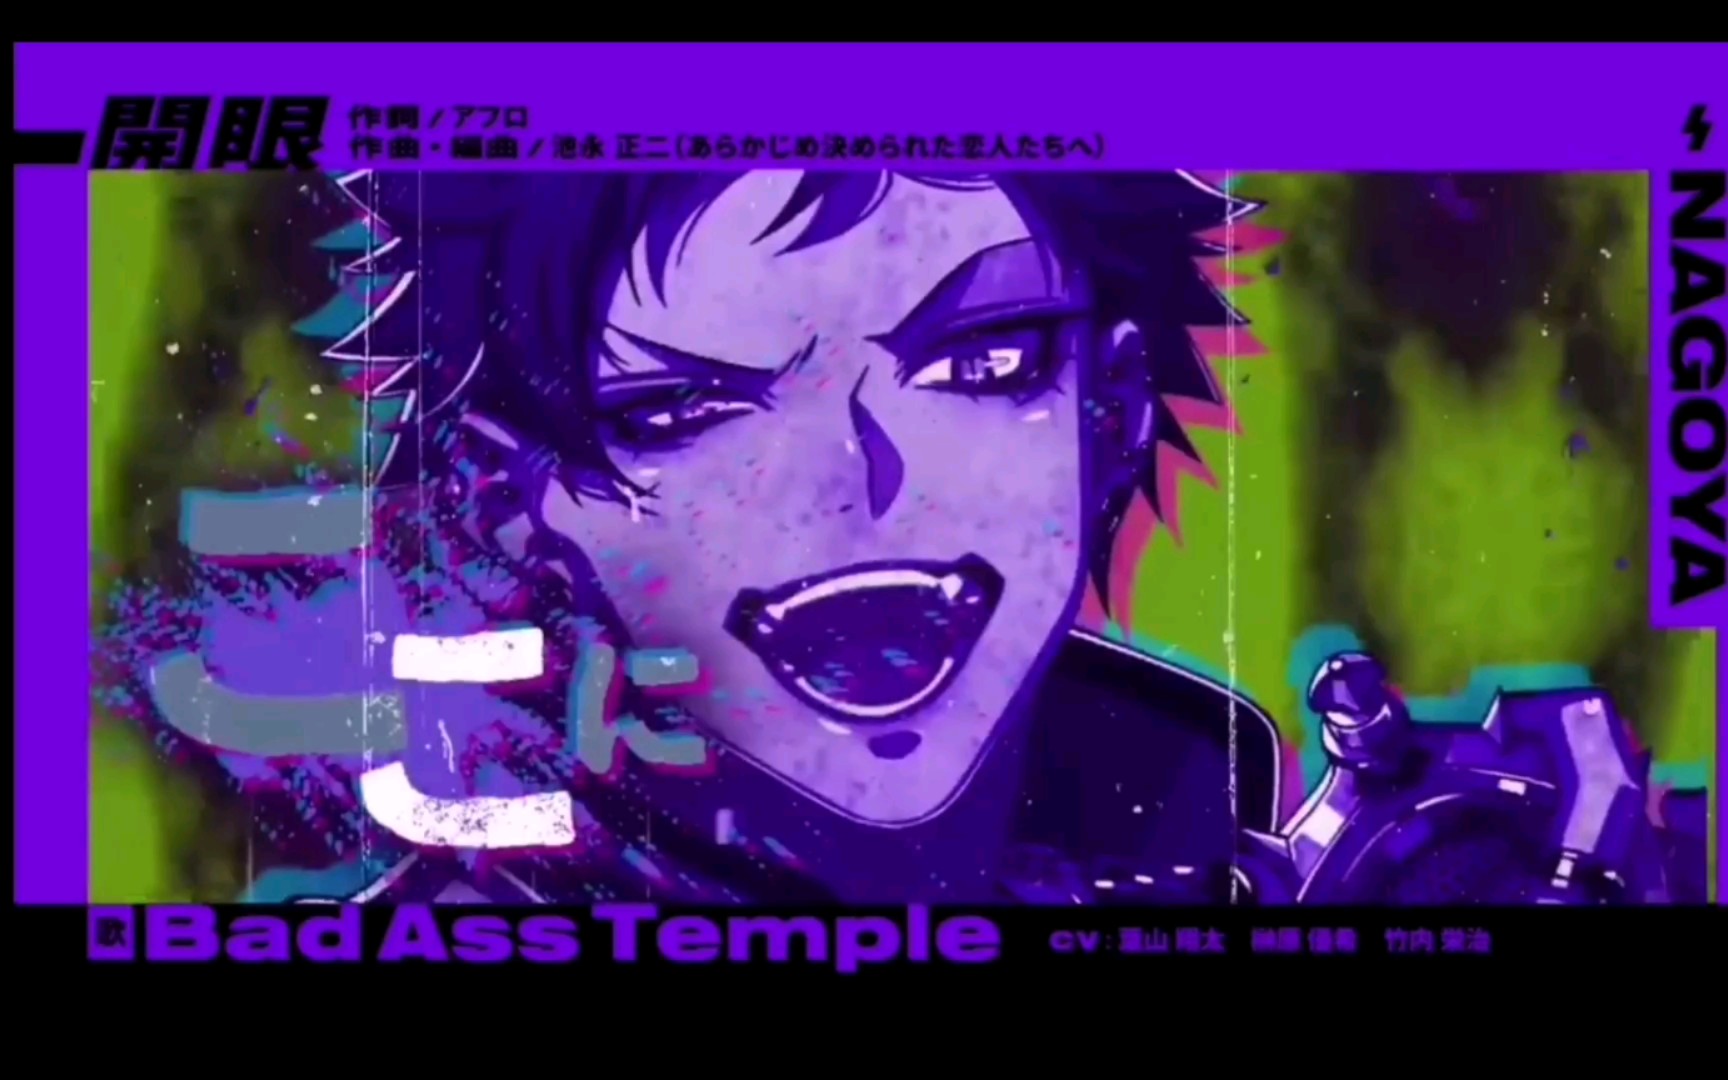 【DRB】名古屋新歌！「開眼」“Bad Ass Temple” Trailer